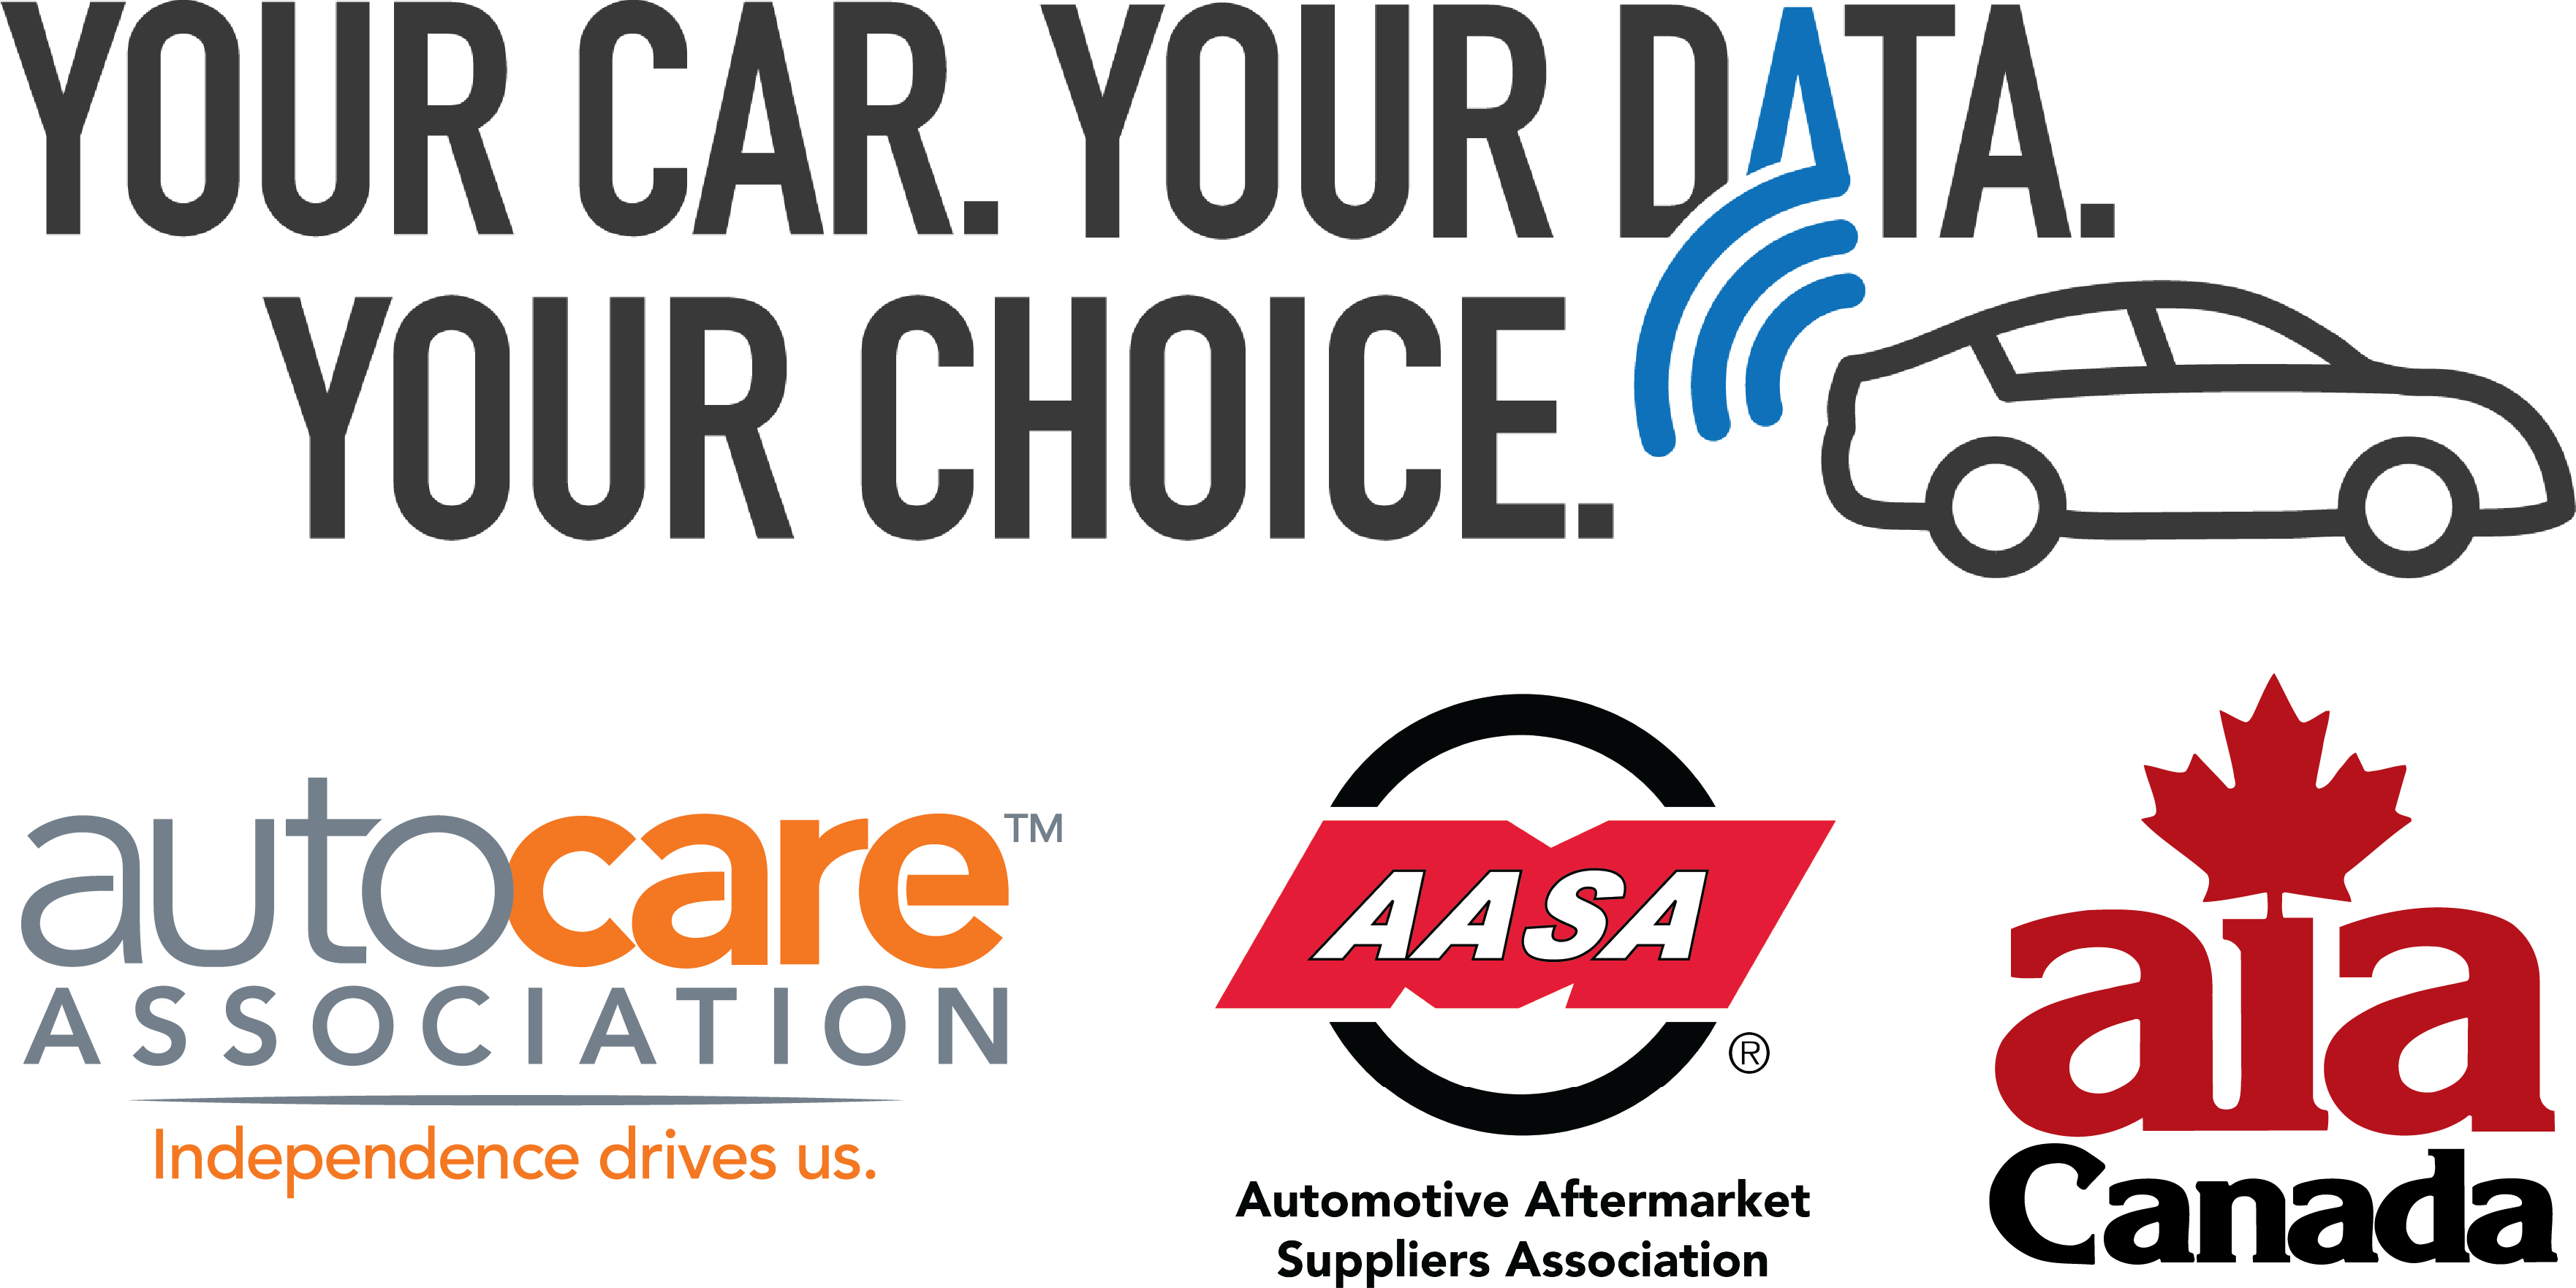 Your Car. Your Data. Your Choice Campaign and Partners Logo Block